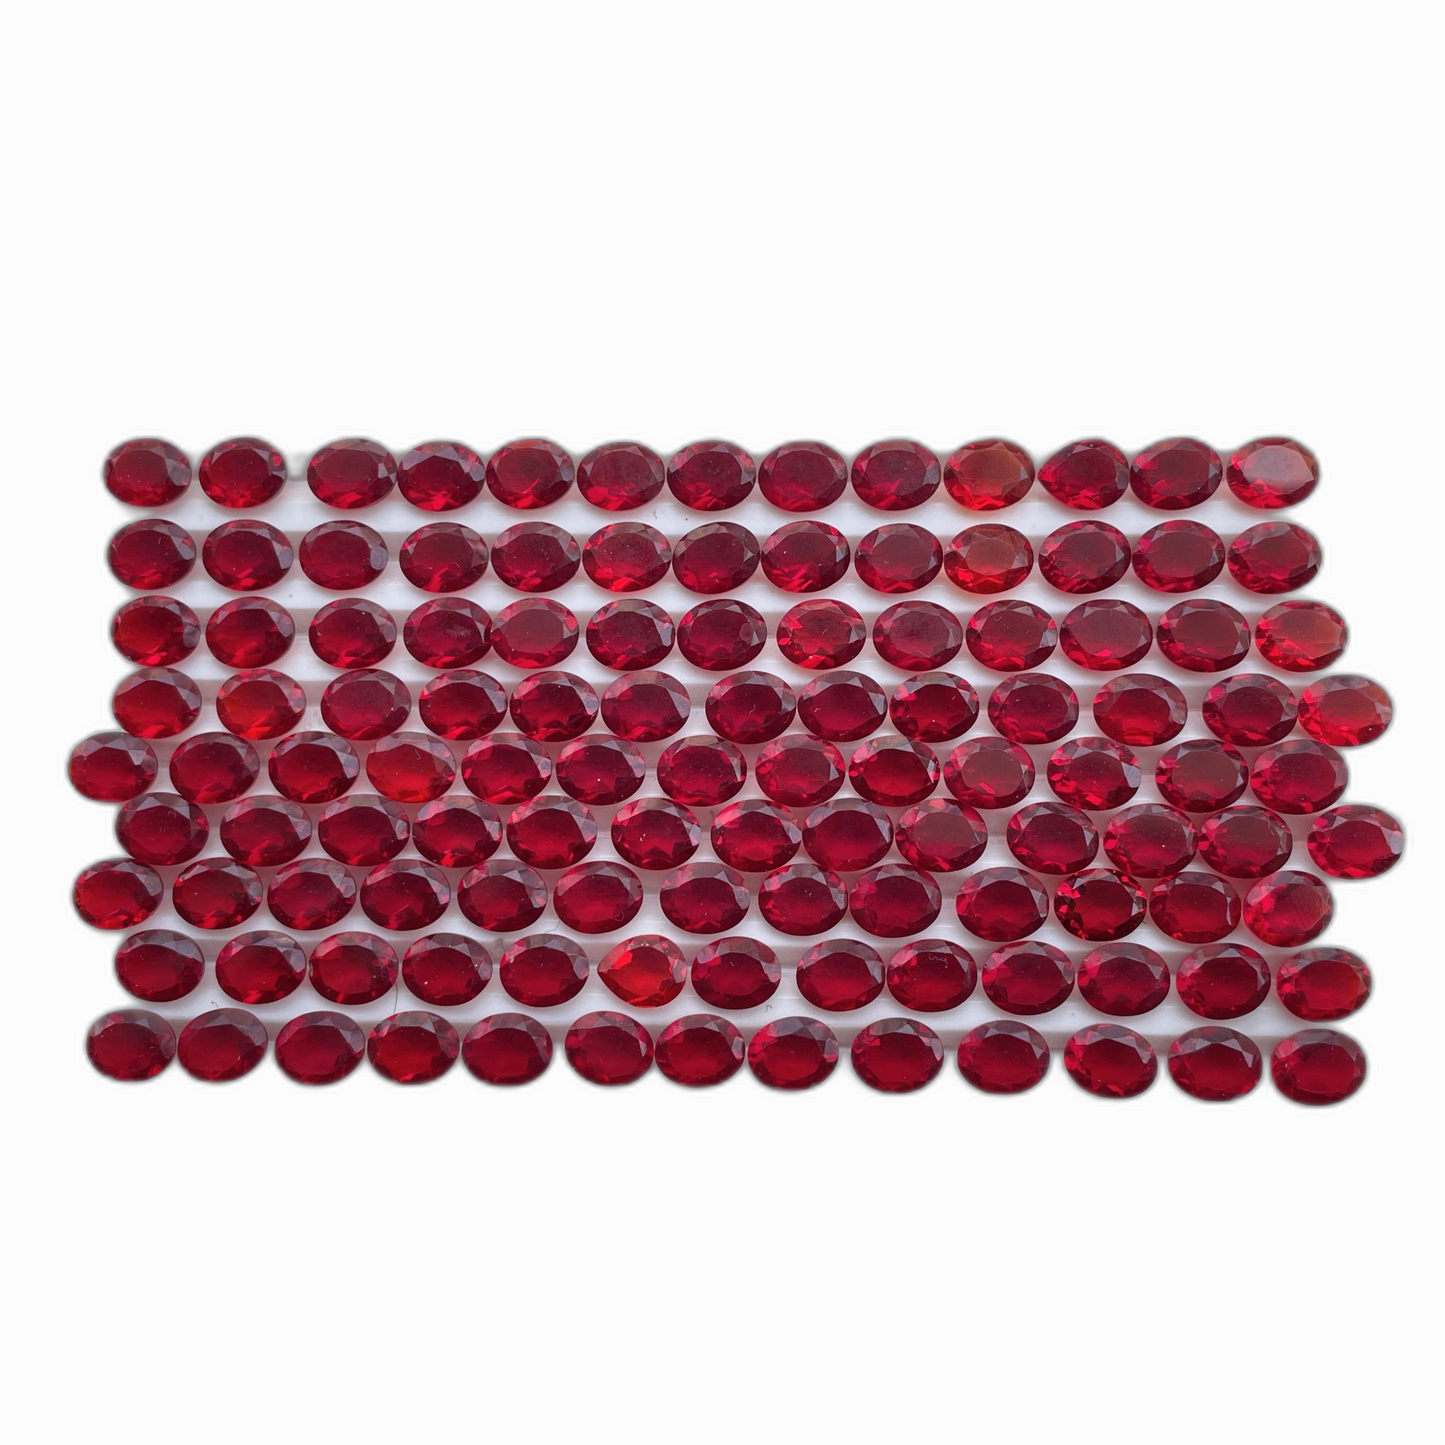 Red Ruby Faceted Nice Quality (8-10 mm) Oval Shape